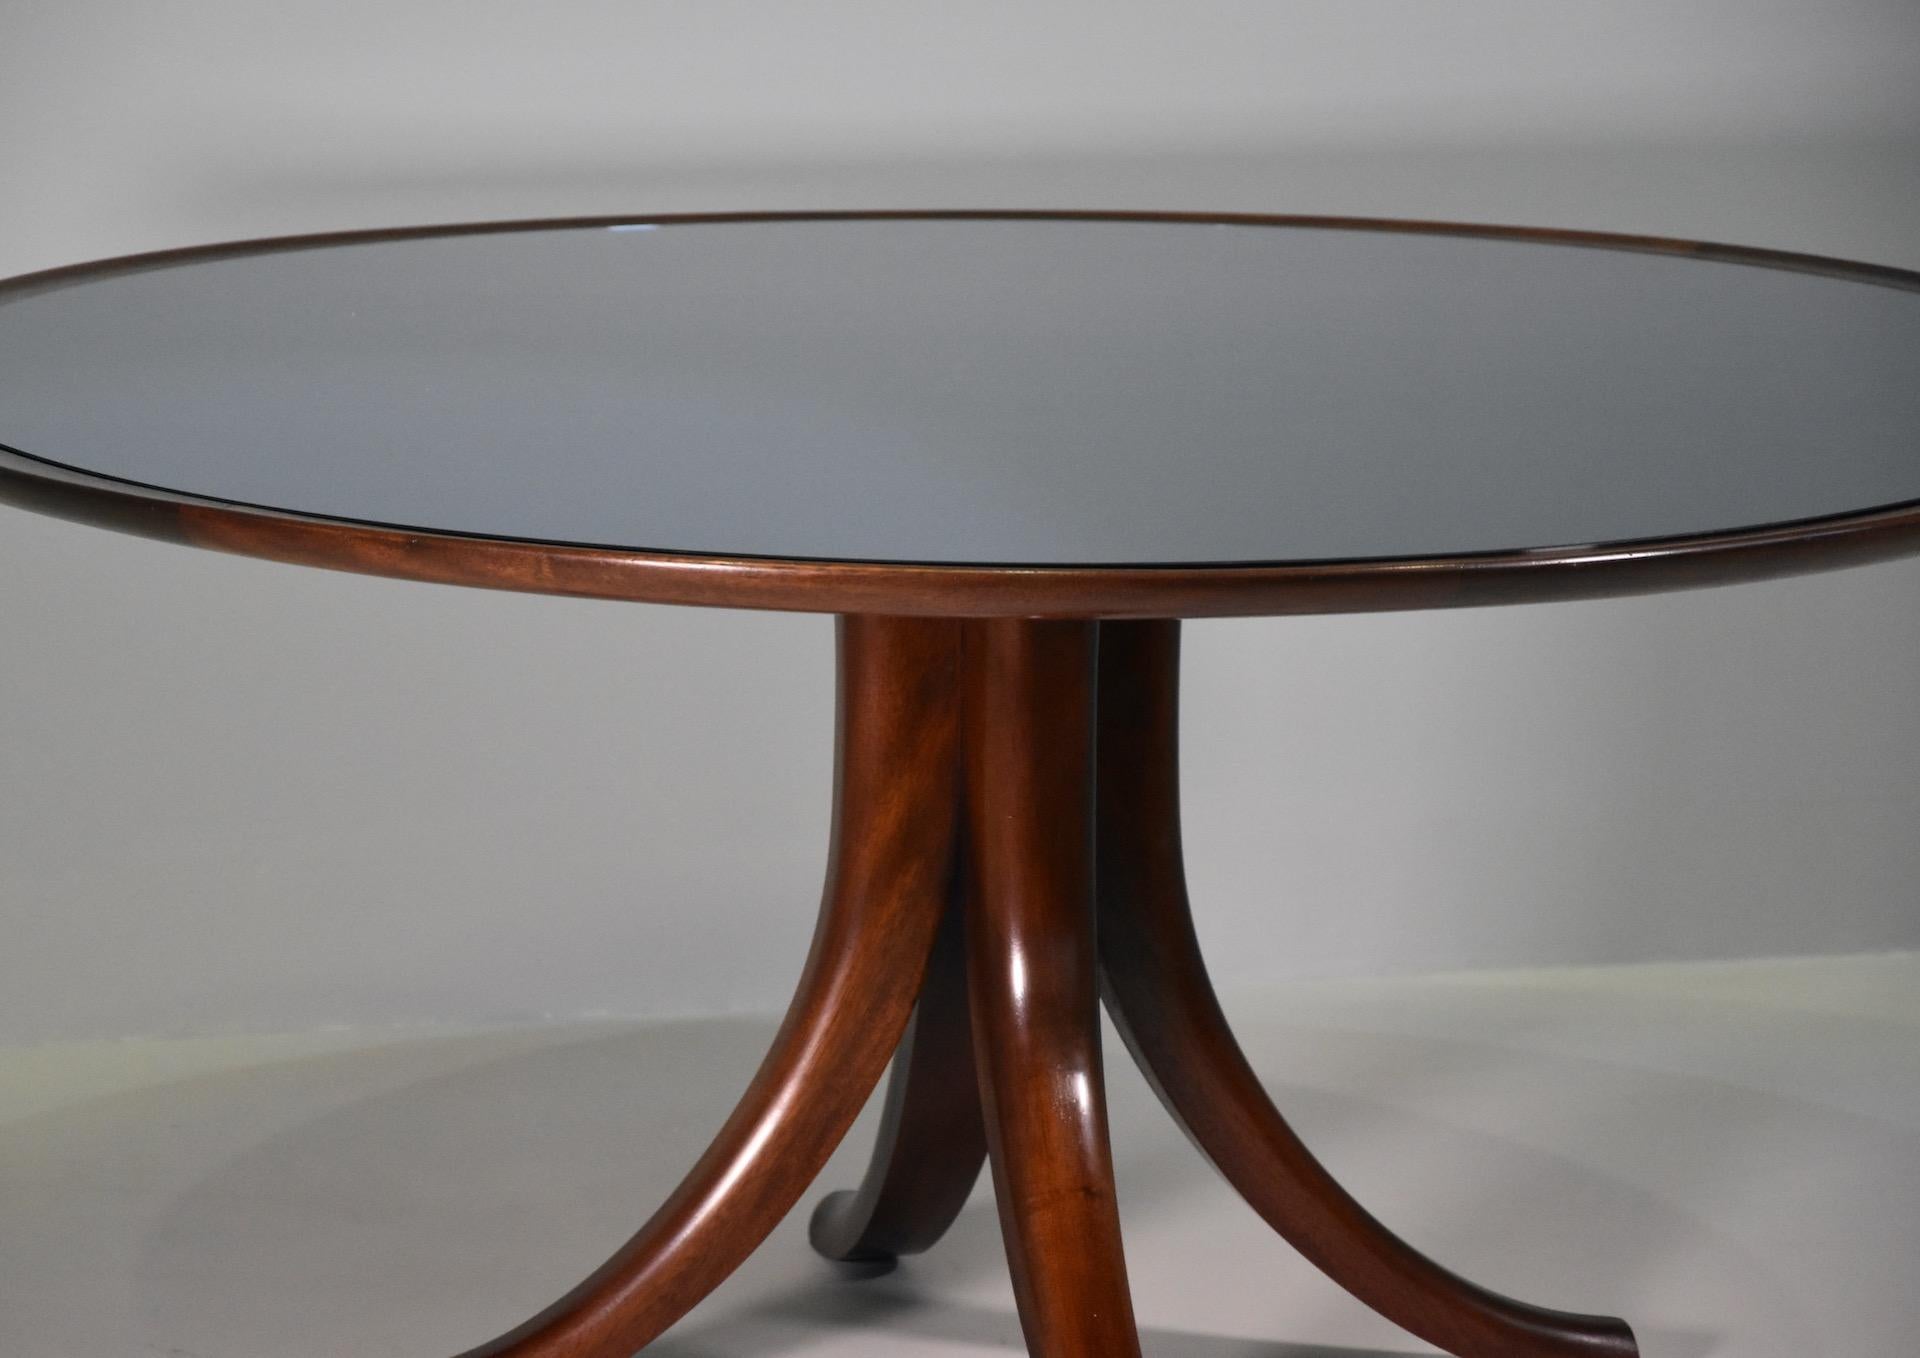 Rare Variant of Big Table Pietro Chiesa for Fontana Arte 1940 Whit Blue Mirror For Sale 1